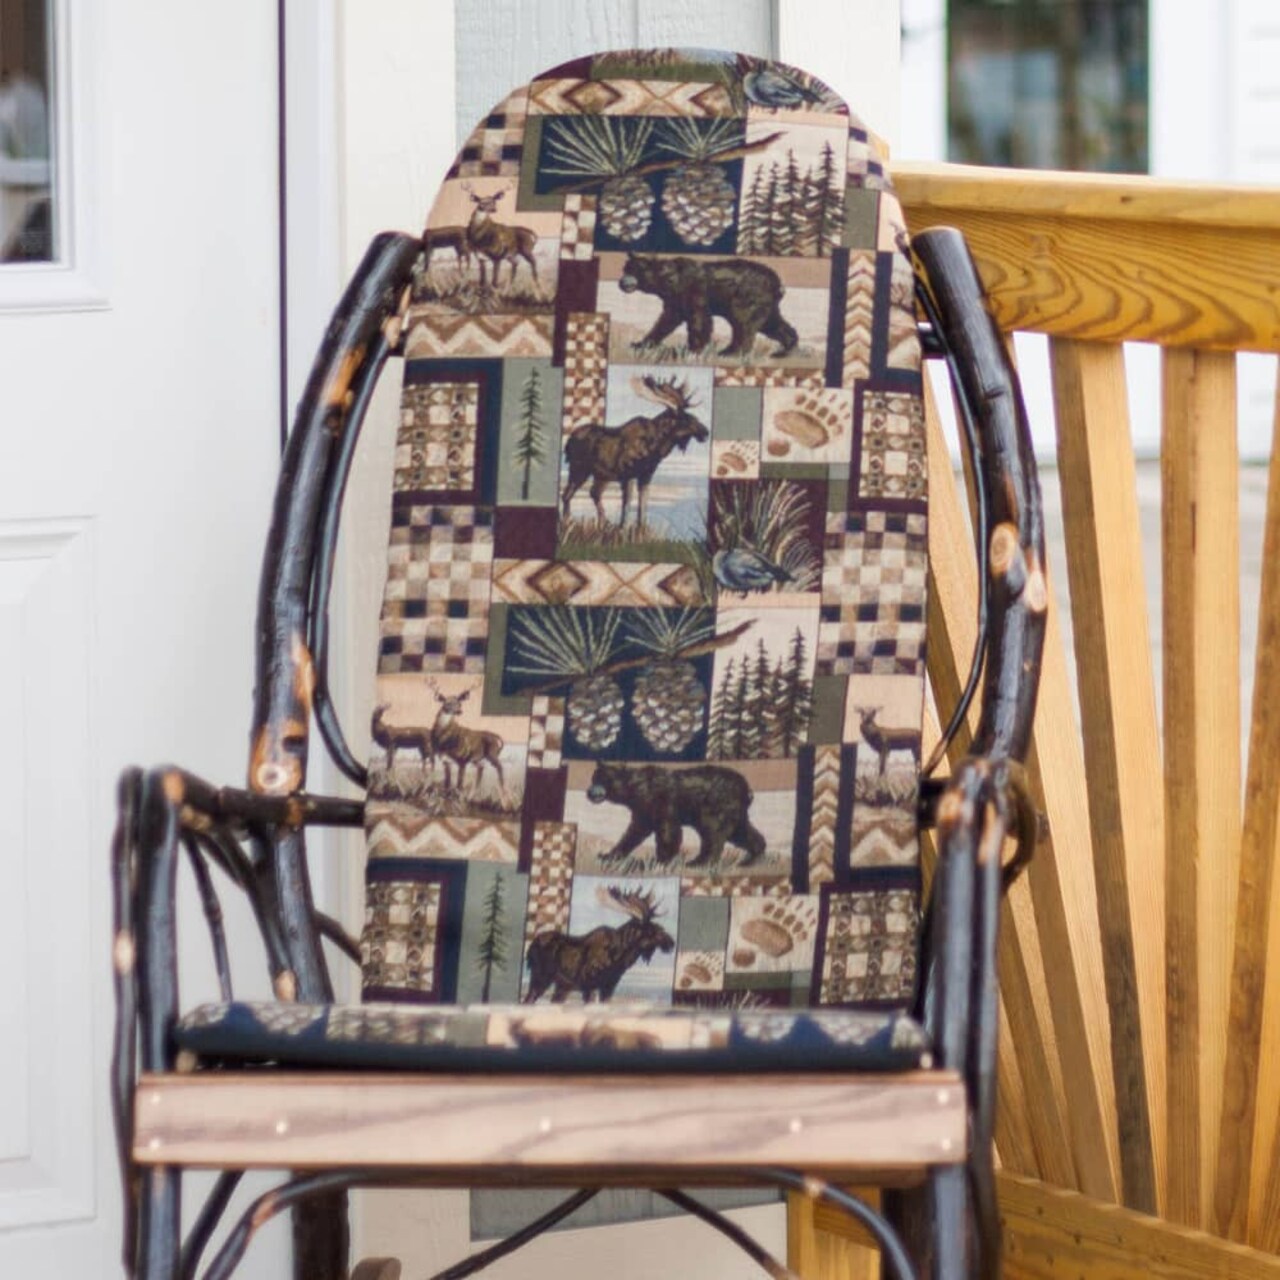 Rojo 85-A Hickory Chair Cushion Pad Wildlife Cover Pattern 2 Piece Set